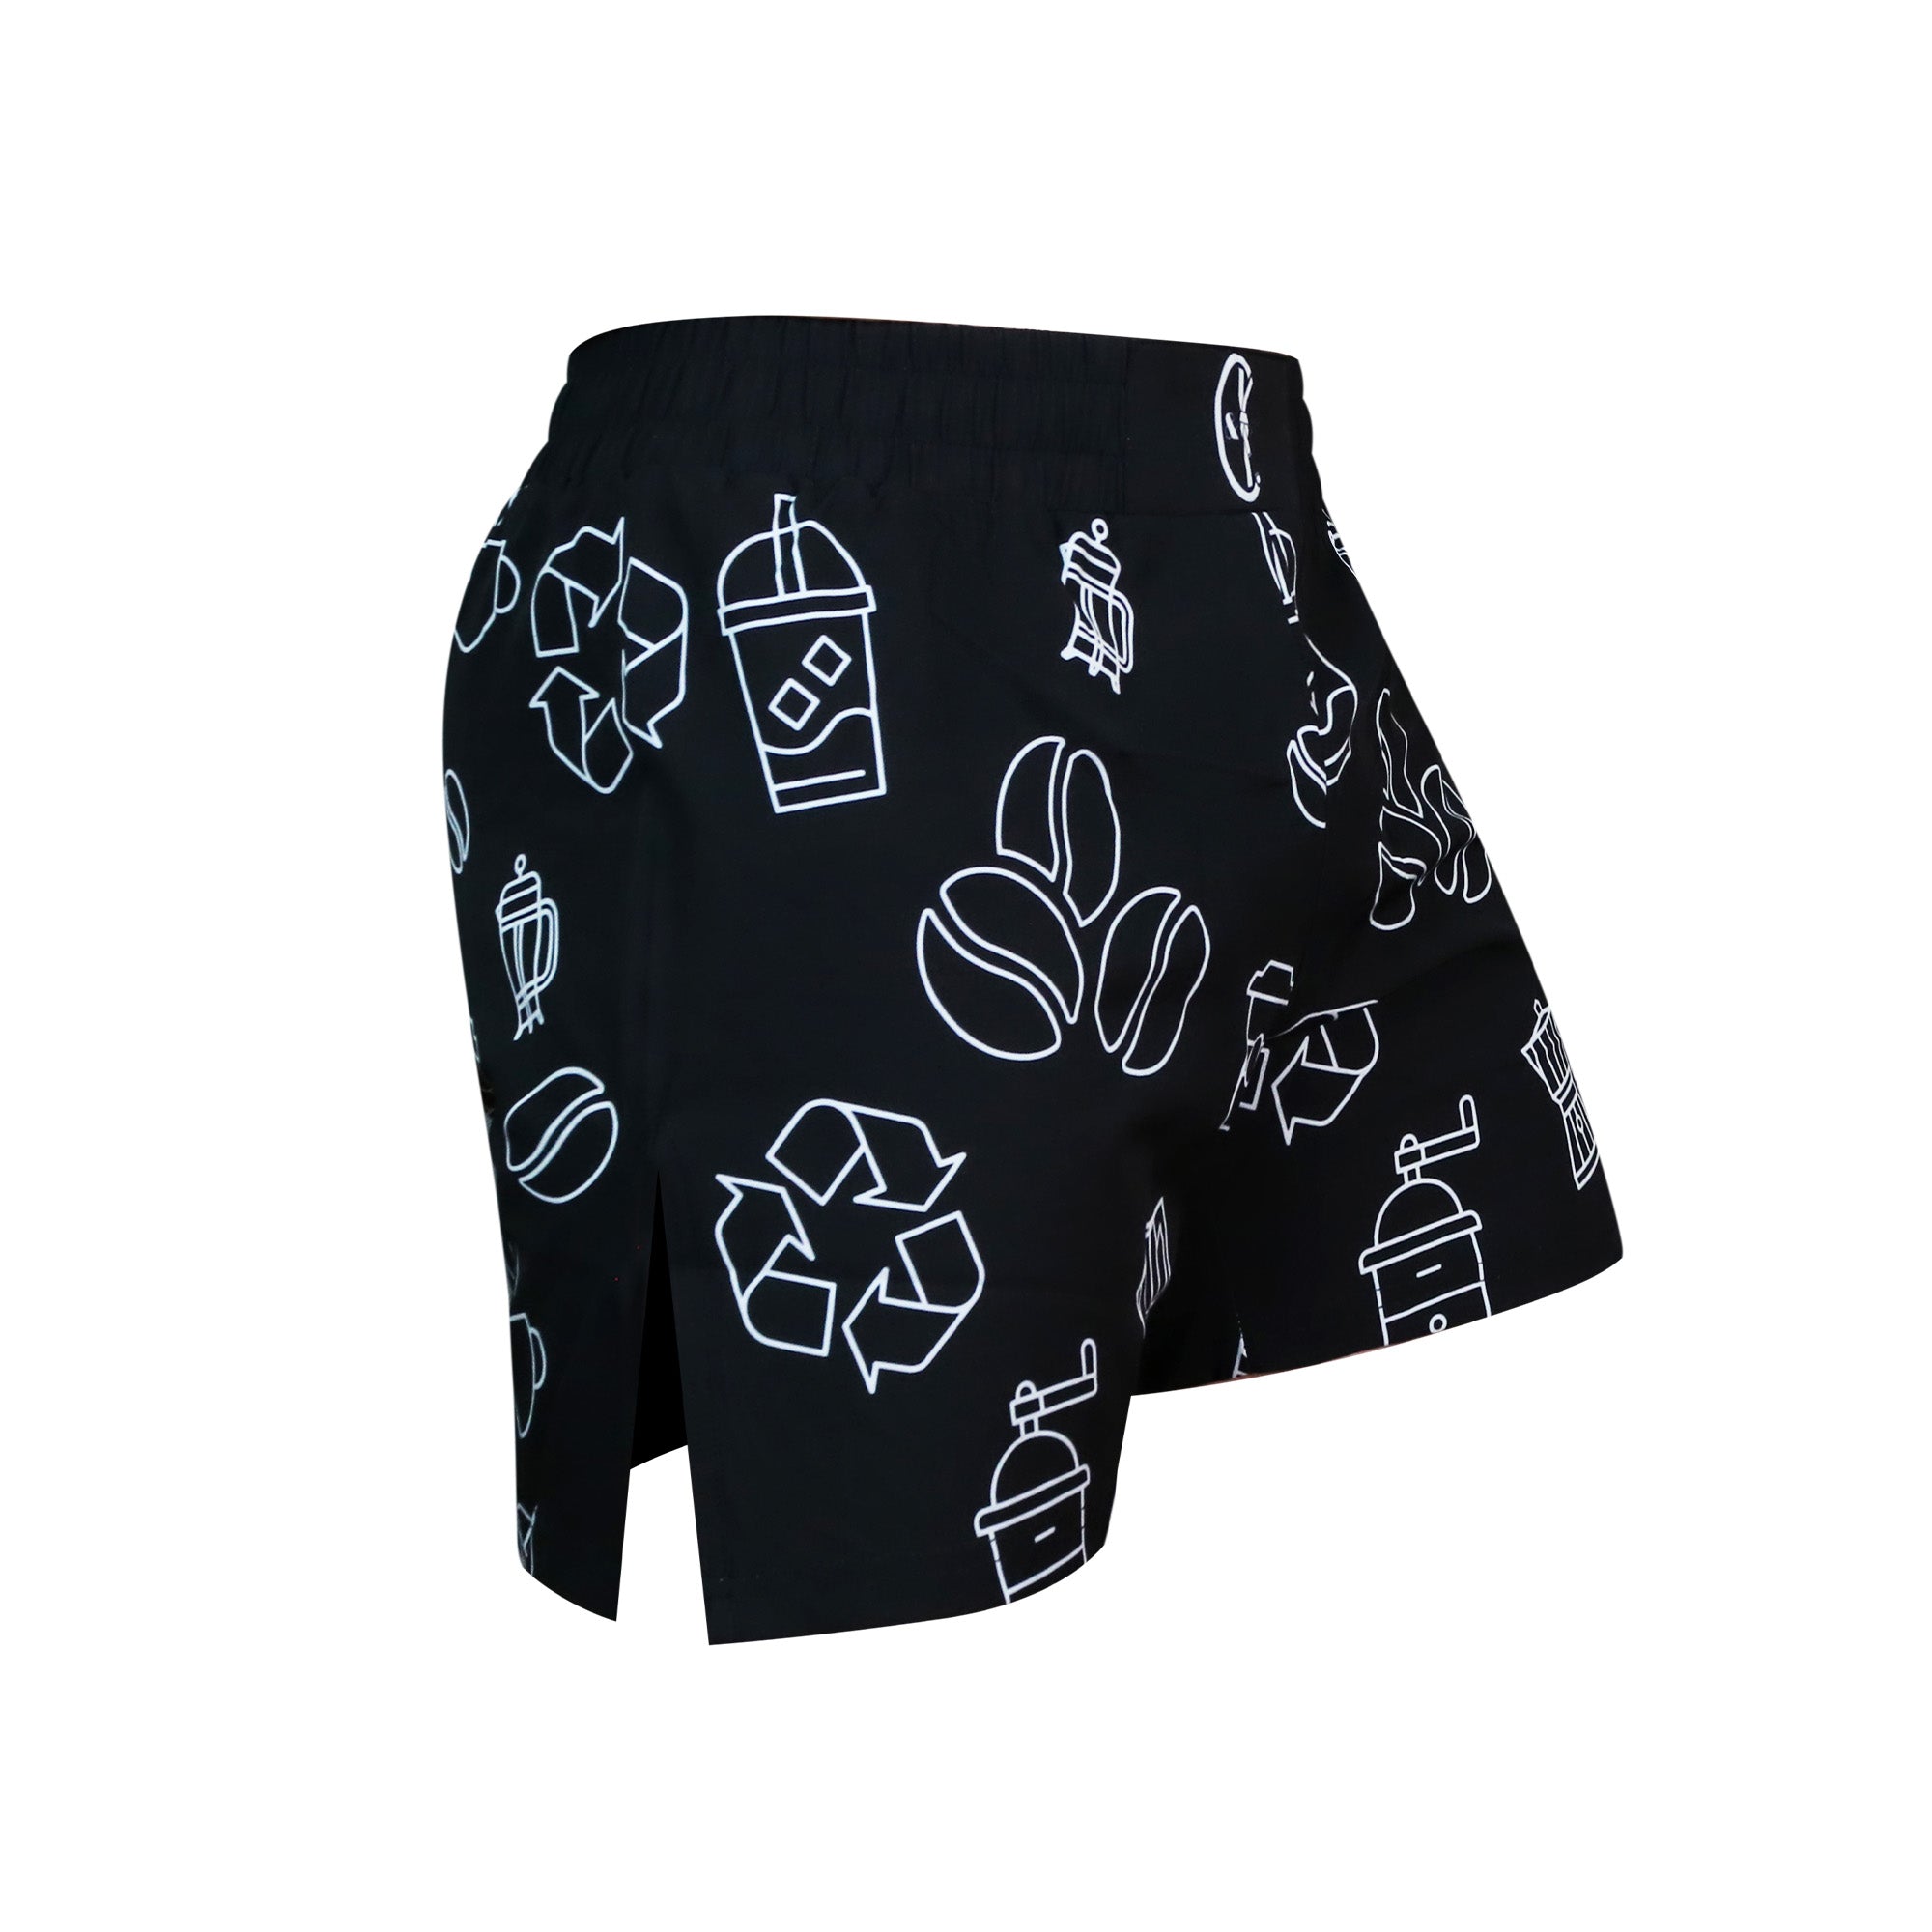 Inverted Doodle Hybrid Fight Shorts - Coffee&Kimuras